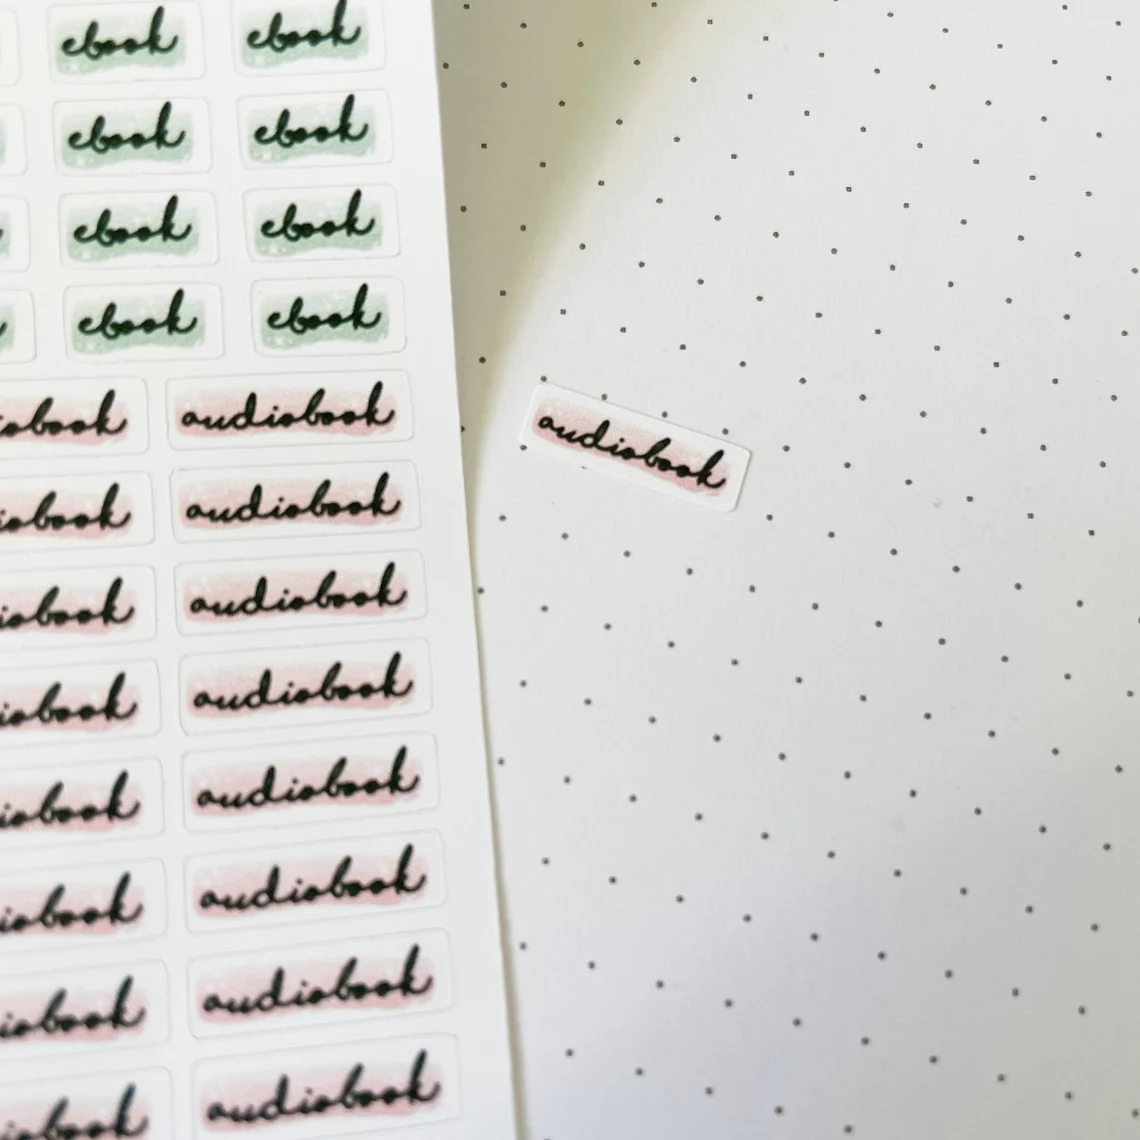 Image of a small sticker that reads "audiobook" in script stuck on a dotted journal page. To the left is a large sticker sheet with several of the audiobook stickers, and others that read "ebook."